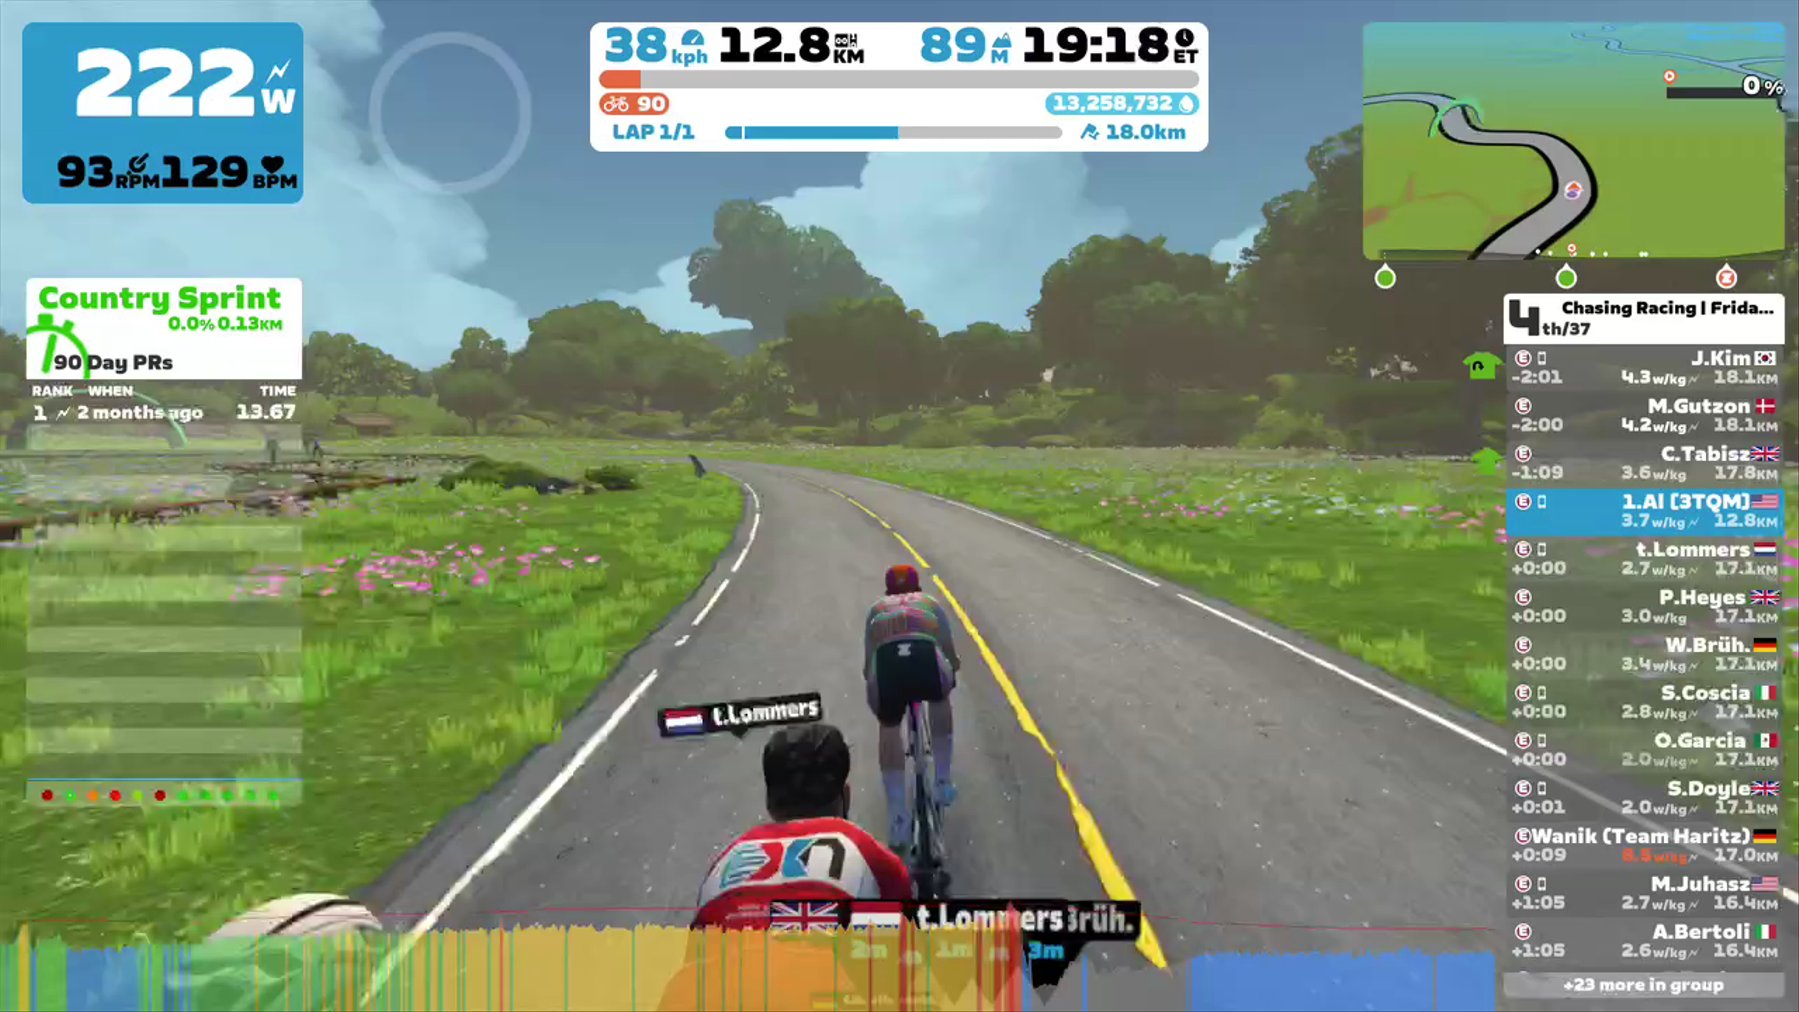 Zwift - Group Ride: Chasing Racing | Friday Group Ride (E) on Chasing the Sun in Makuri Islands